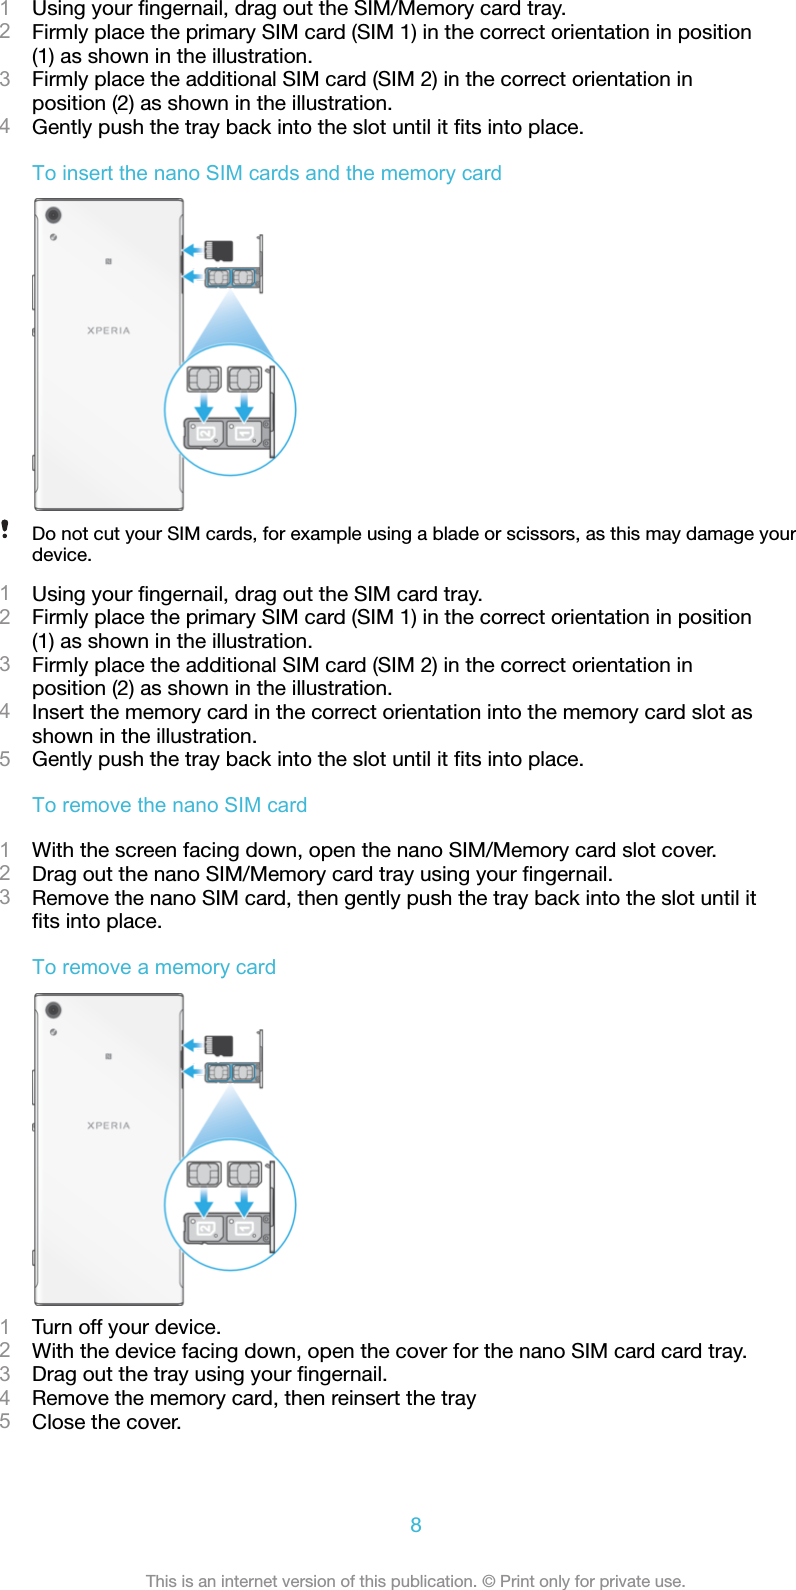 1Using your ﬁngernail, drag out the SIM/Memory card tray.2Firmly place the primary SIM card (SIM 1) in the correct orientation in position(1) as shown in the illustration.3Firmly place the additional SIM card (SIM 2) in the correct orientation inposition (2) as shown in the illustration.4Gently push the tray back into the slot until it ﬁts into place.To insert the nano SIM cards and the memory cardDo not cut your SIM cards, for example using a blade or scissors, as this may damage yourdevice.1Using your ﬁngernail, drag out the SIM card tray.2Firmly place the primary SIM card (SIM 1) in the correct orientation in position(1) as shown in the illustration.3Firmly place the additional SIM card (SIM 2) in the correct orientation inposition (2) as shown in the illustration.4Insert the memory card in the correct orientation into the memory card slot asshown in the illustration.5Gently push the tray back into the slot until it ﬁts into place.To remove the nano SIM card1With the screen facing down, open the nano SIM/Memory card slot cover.2Drag out the nano SIM/Memory card tray using your ﬁngernail.3Remove the nano SIM card, then gently push the tray back into the slot until itﬁts into place.To remove a memory card1Turn off your device.2With the device facing down, open the cover for the nano SIM card card tray.3Drag out the tray using your ﬁngernail.4Remove the memory card, then reinsert the tray5Close the cover.8This is an internet version of this publication. © Print only for private use.